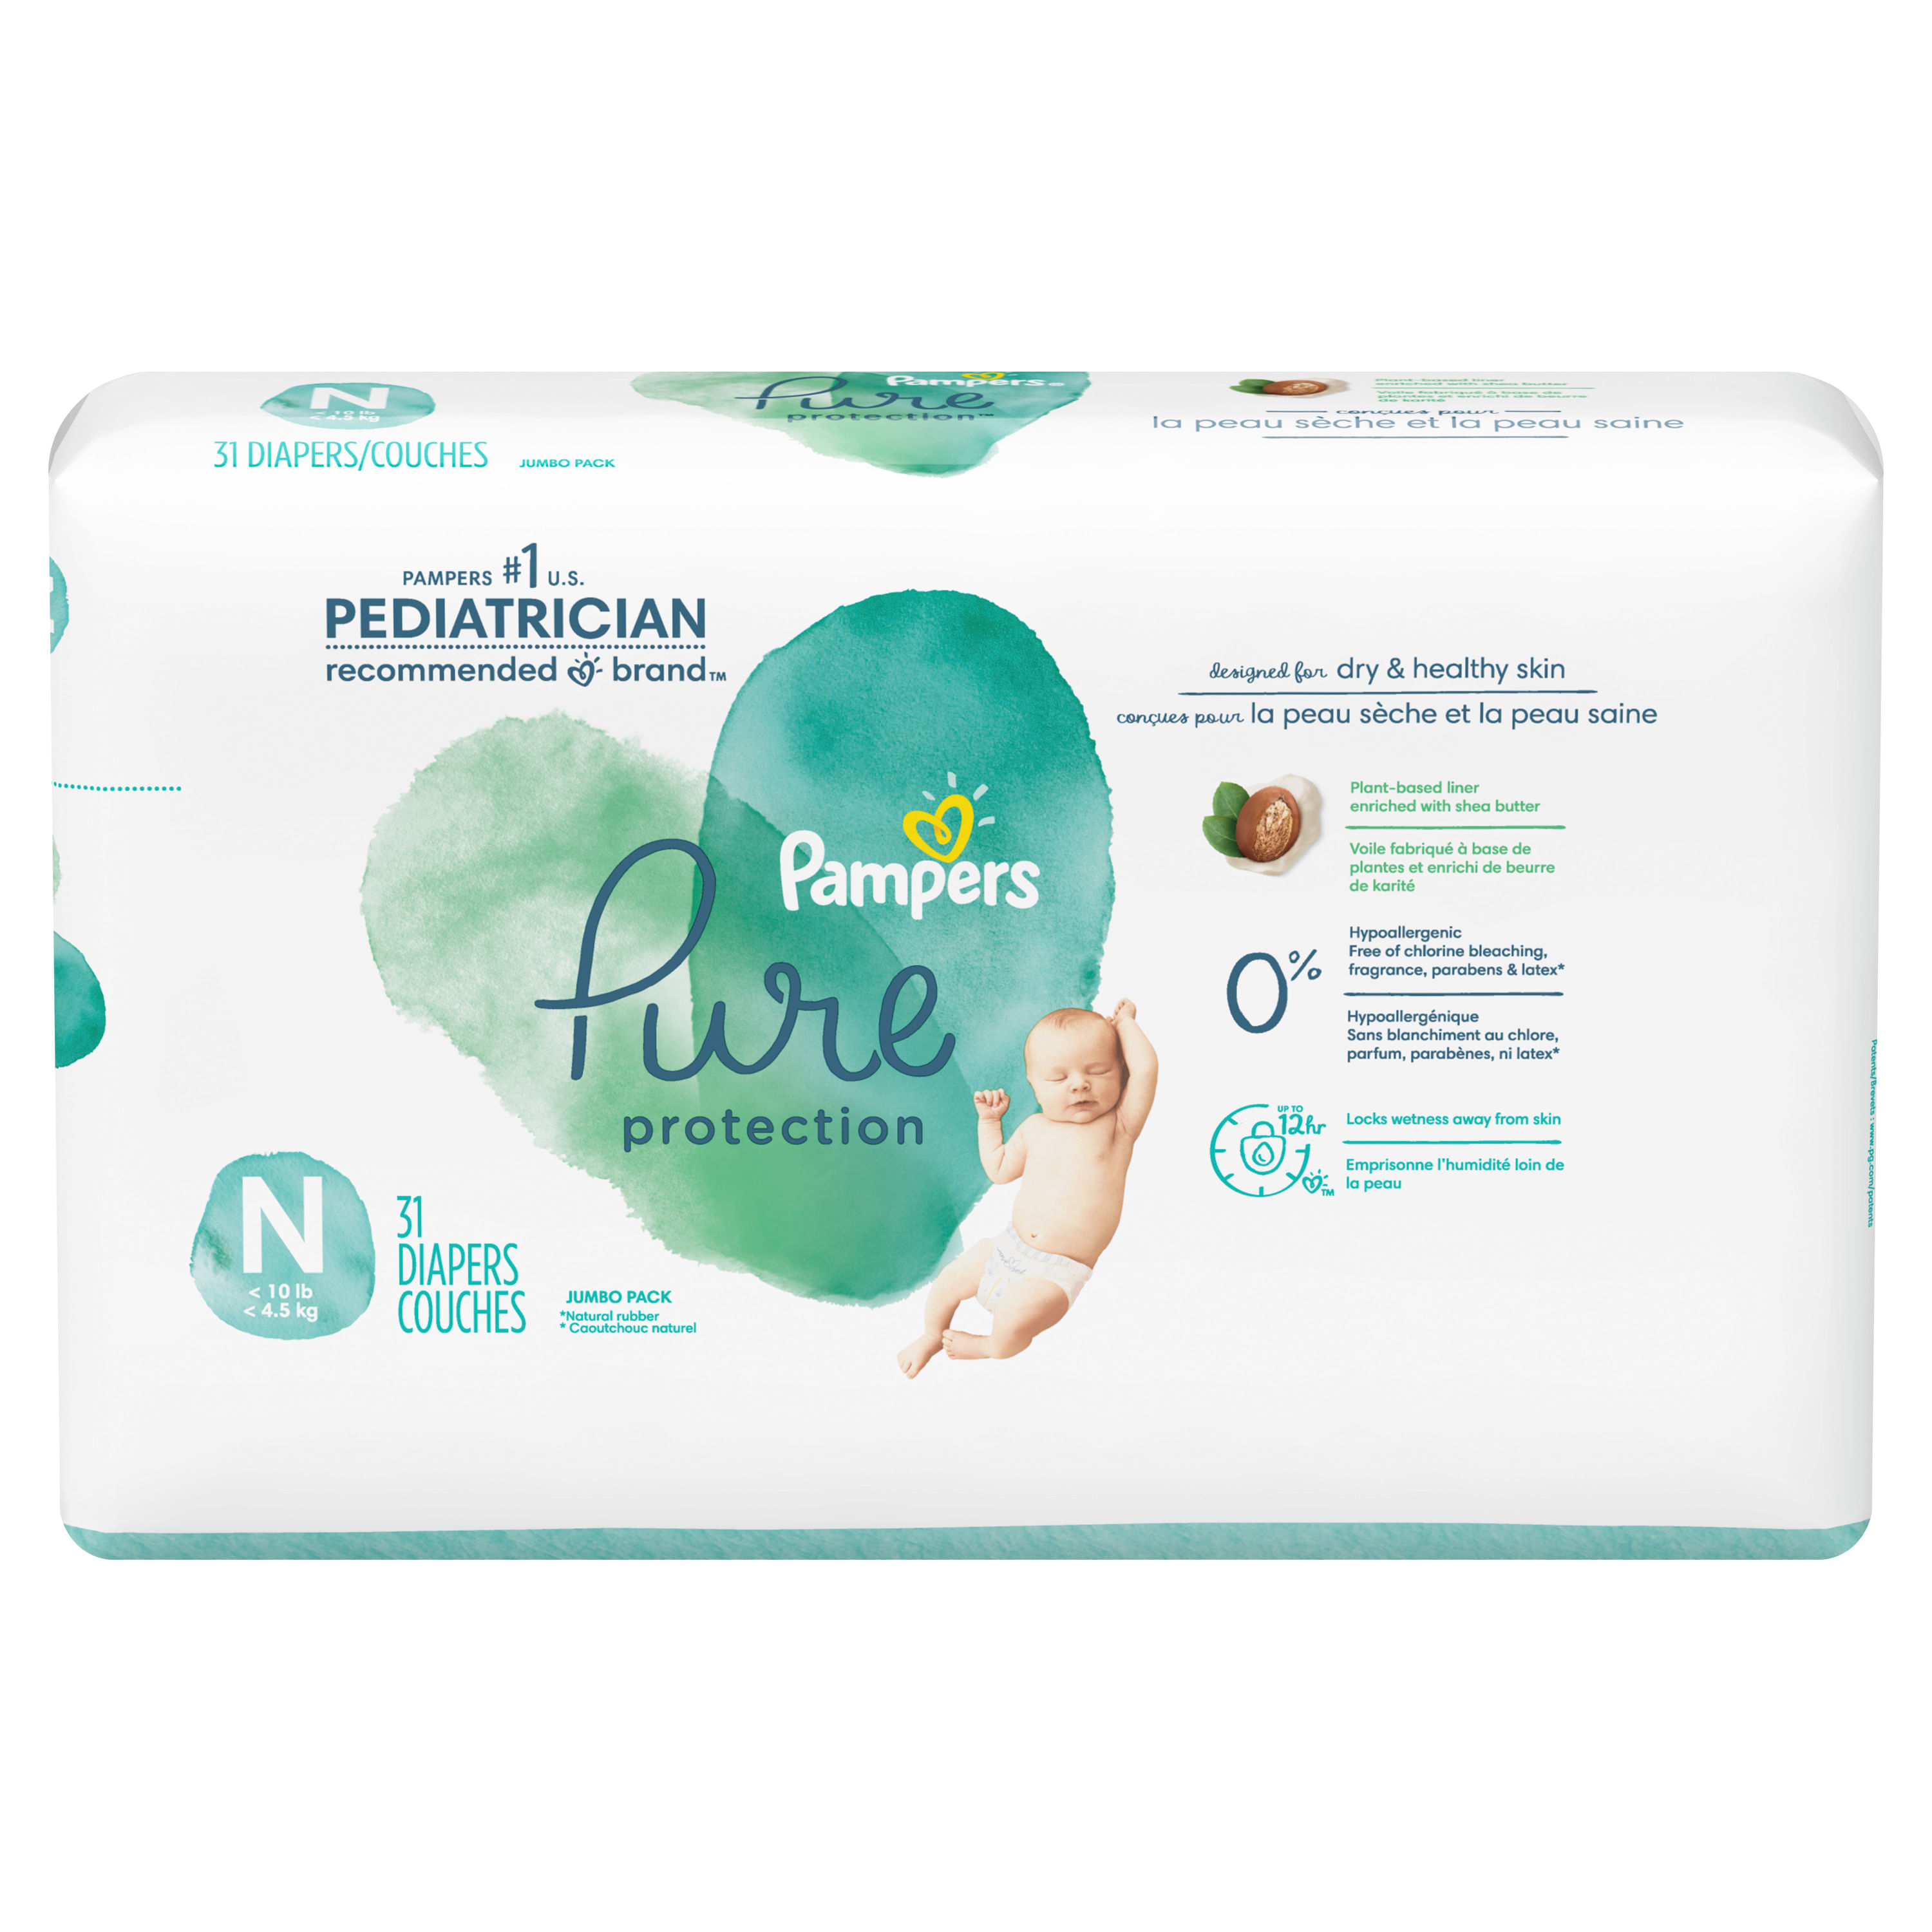 Pañales Pampers Pure Protection Talla N, 31 Unidades